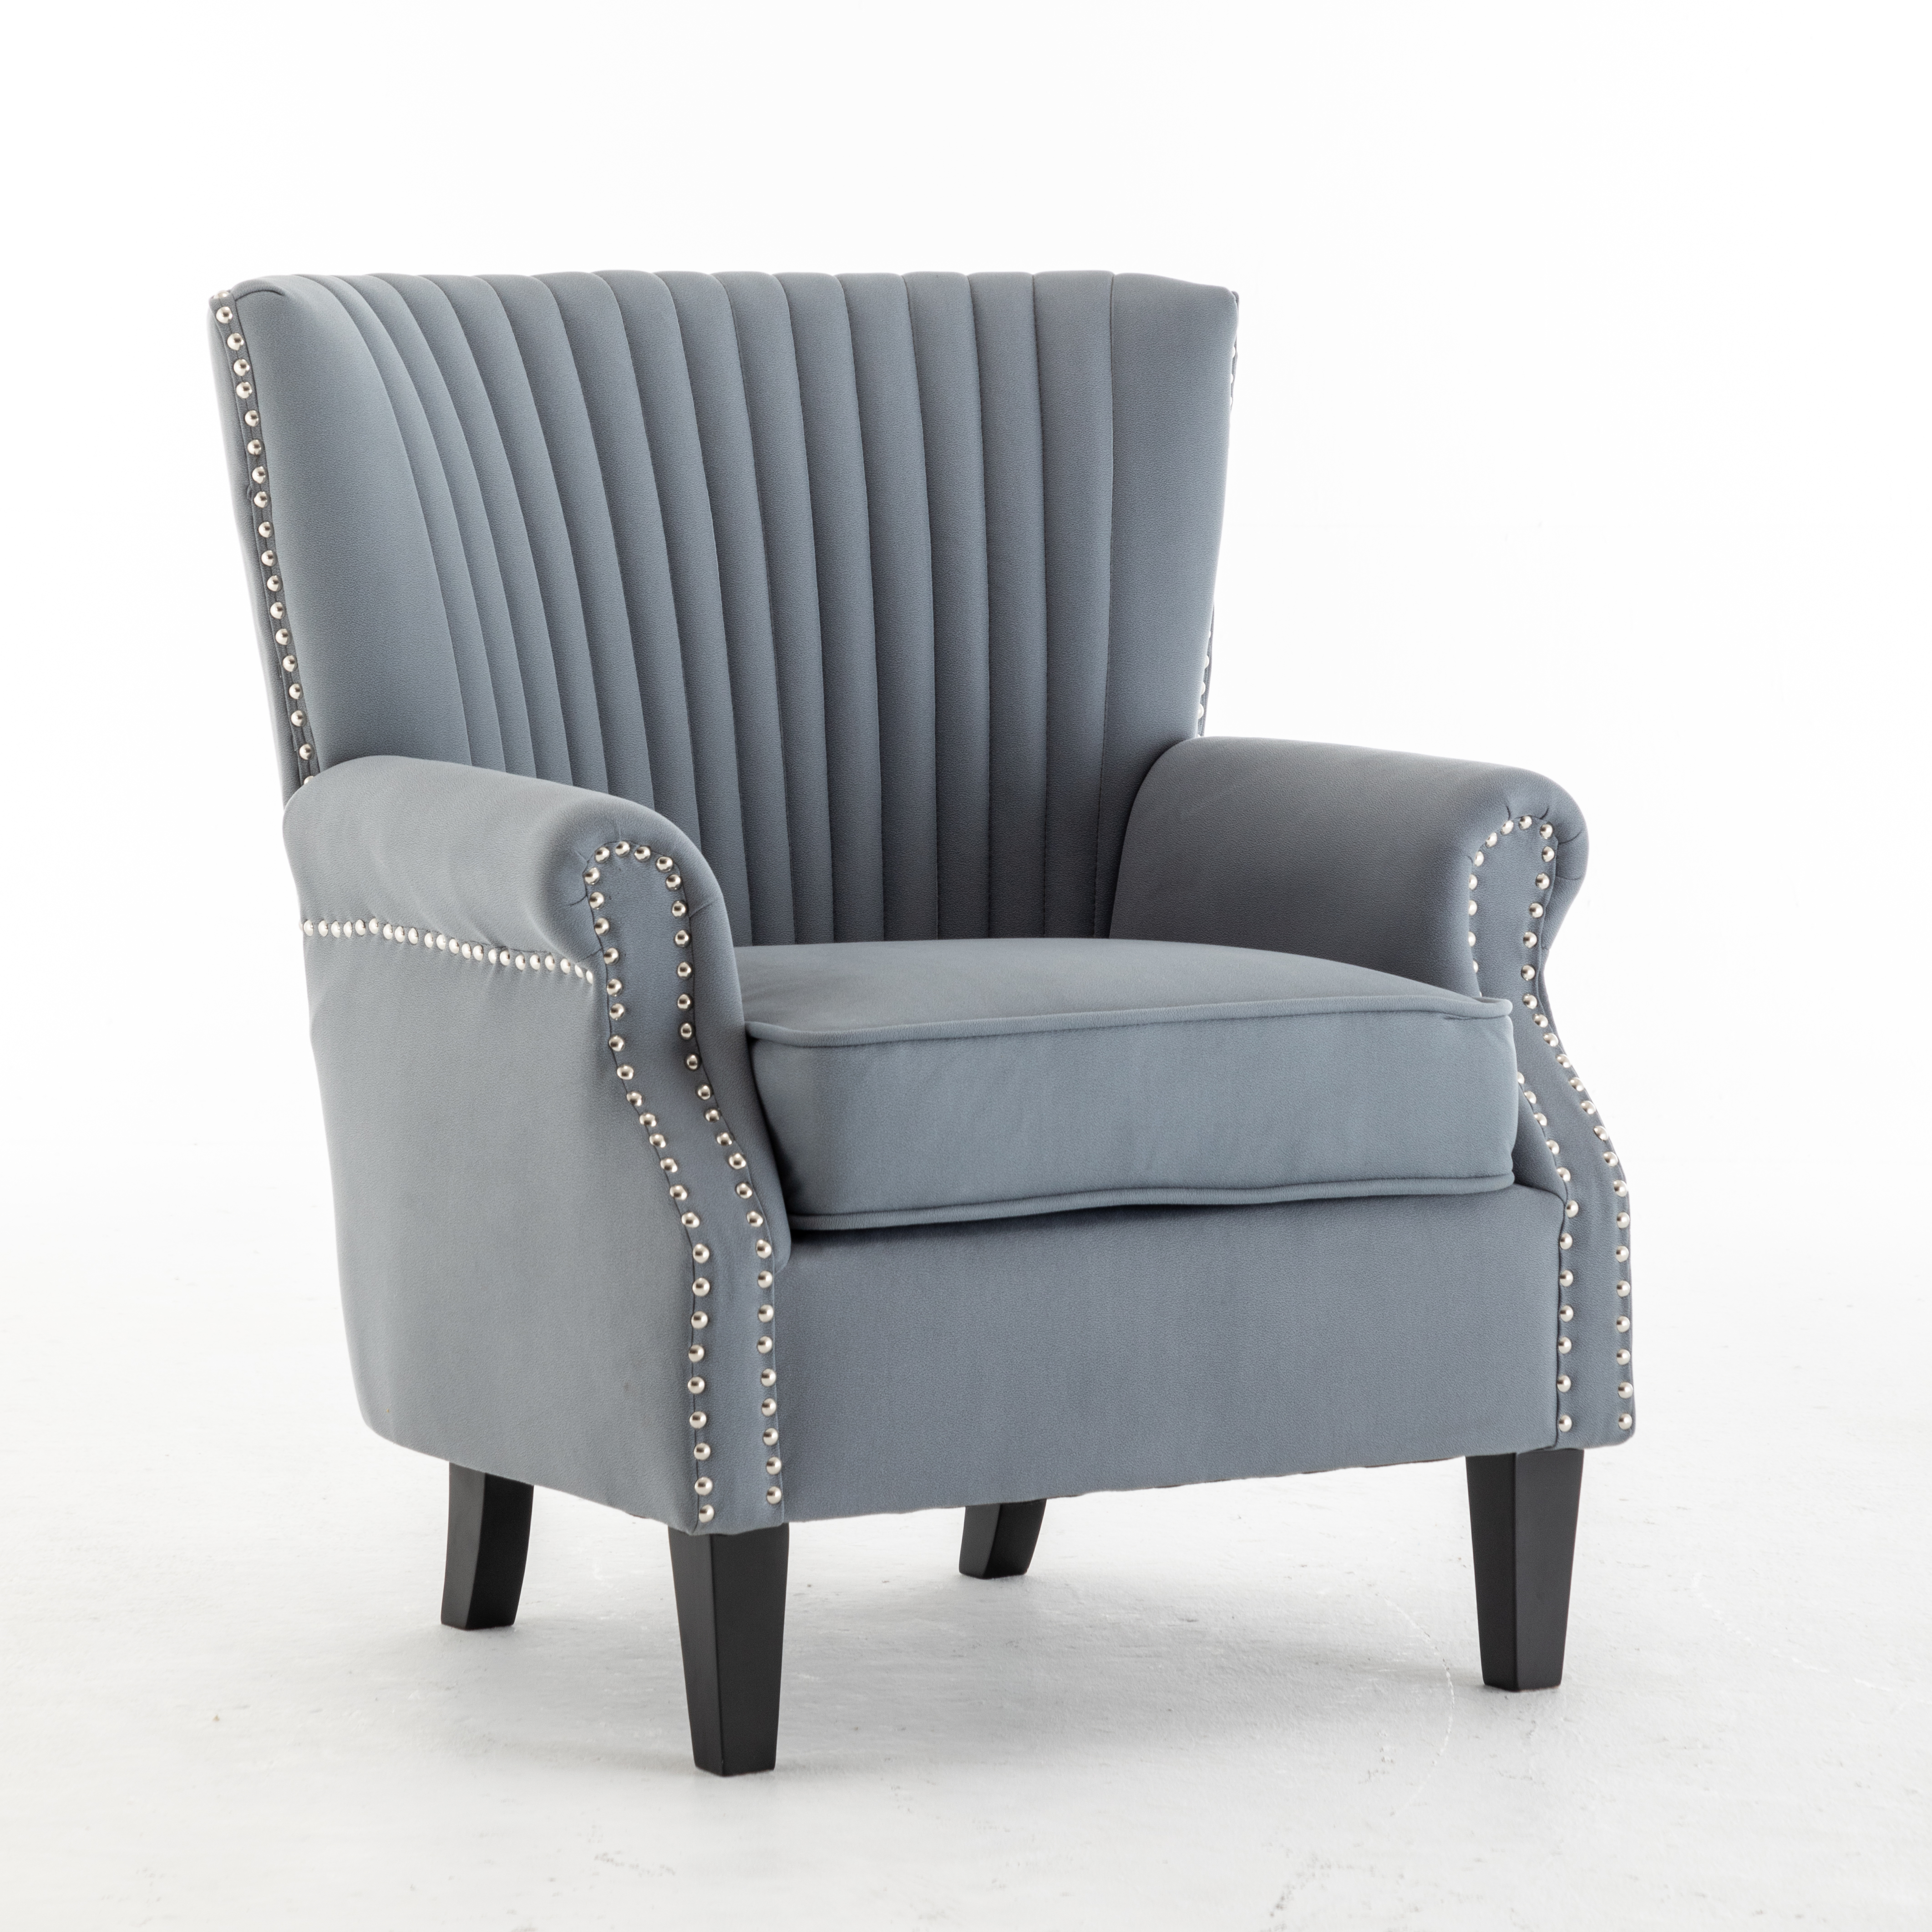 Accent Chair, Living Room Wingback Chair, Tufted Armchair with Padded Seat, Upholstered Accent Reading Chair-CASAINC